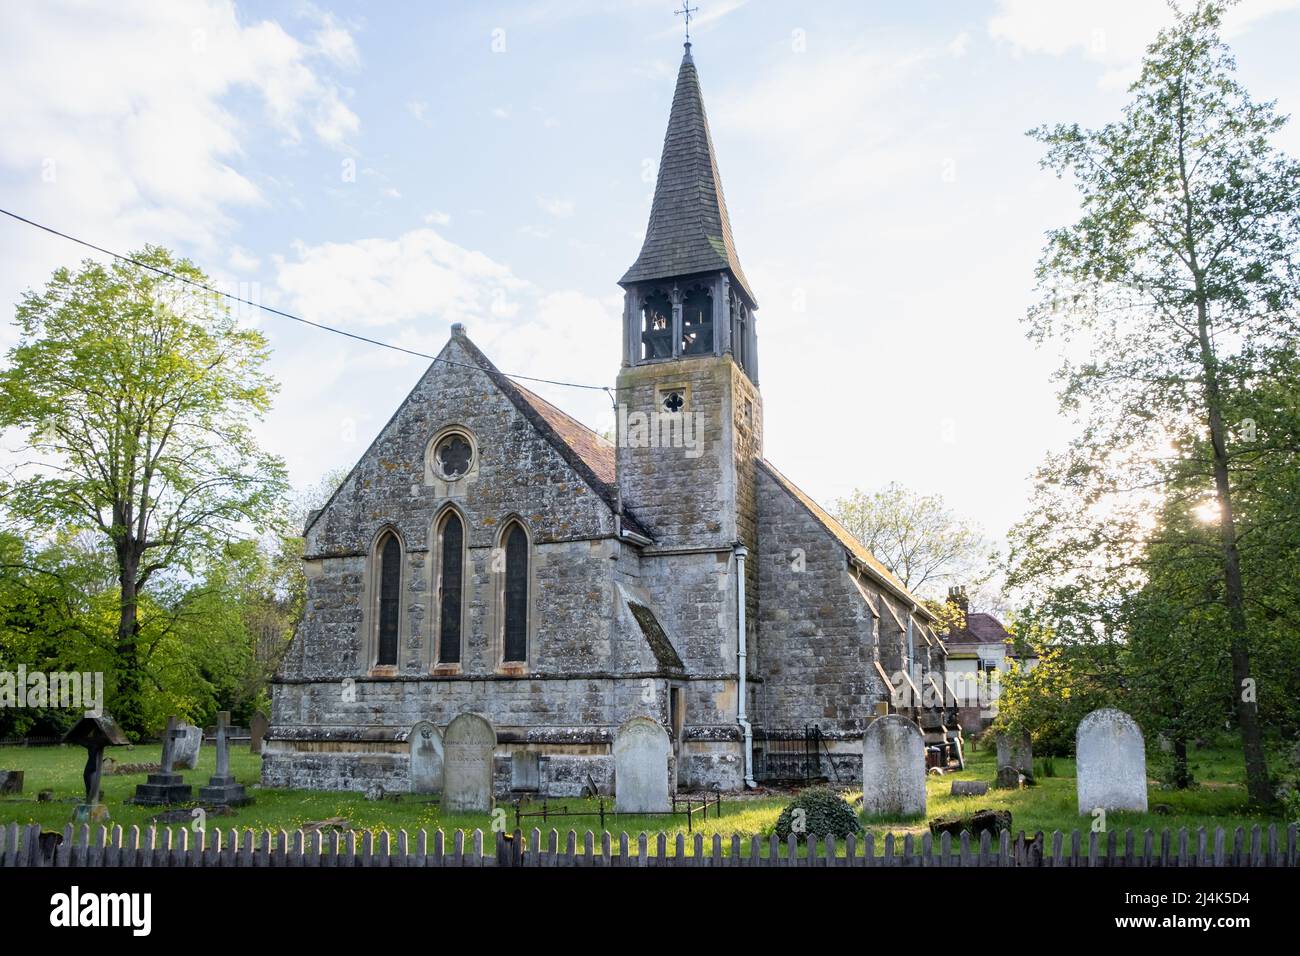 The Anglican church and chuchyard of St. Giles in the small Essex village of Langford not far from Maldon. Stock Photo